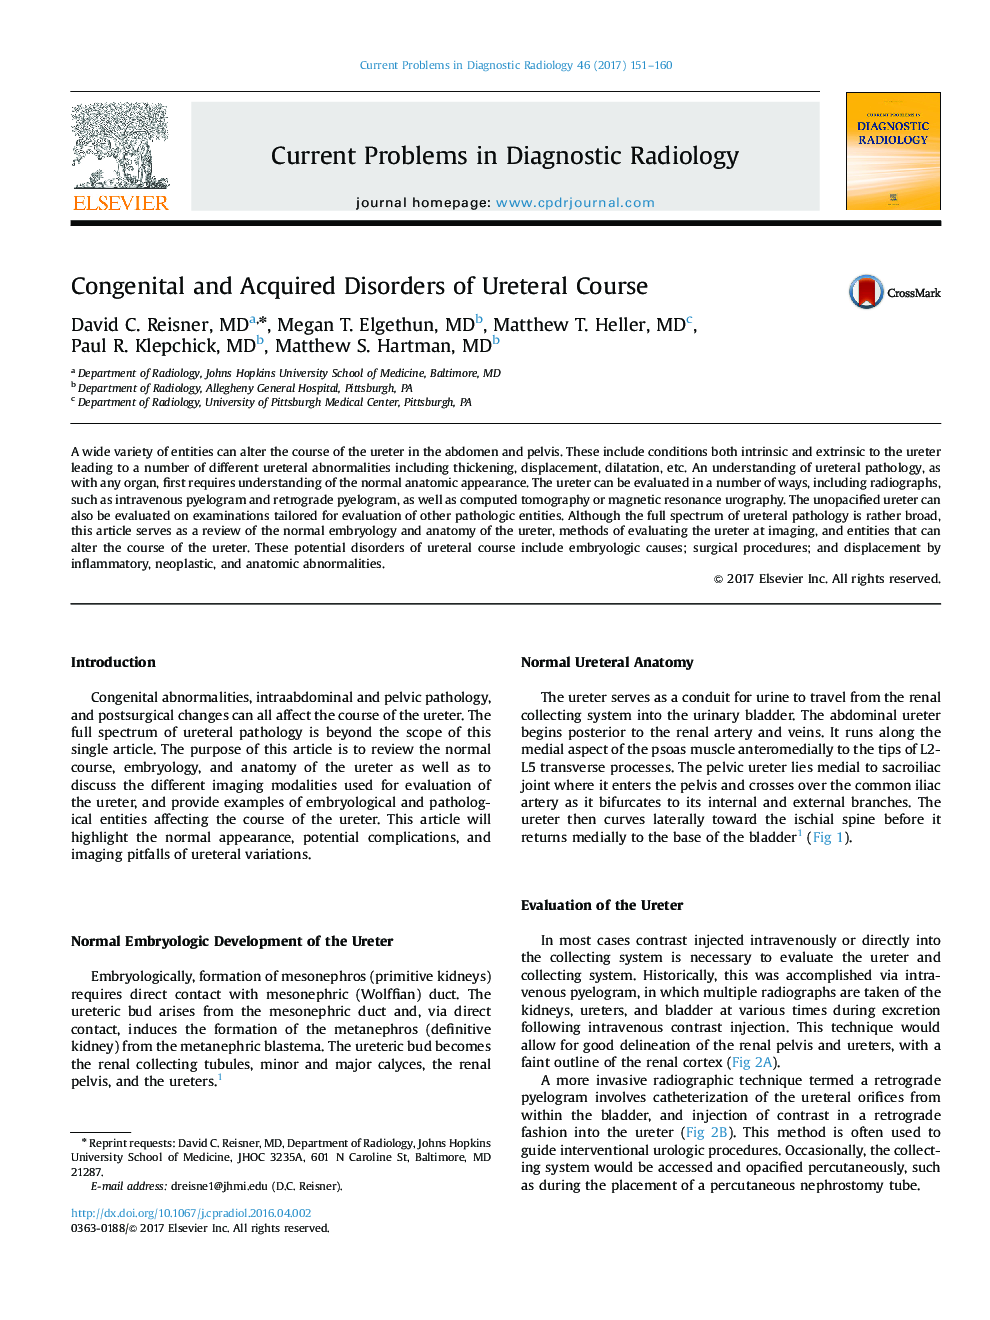 Congenital and Acquired Disorders of Ureteral Course